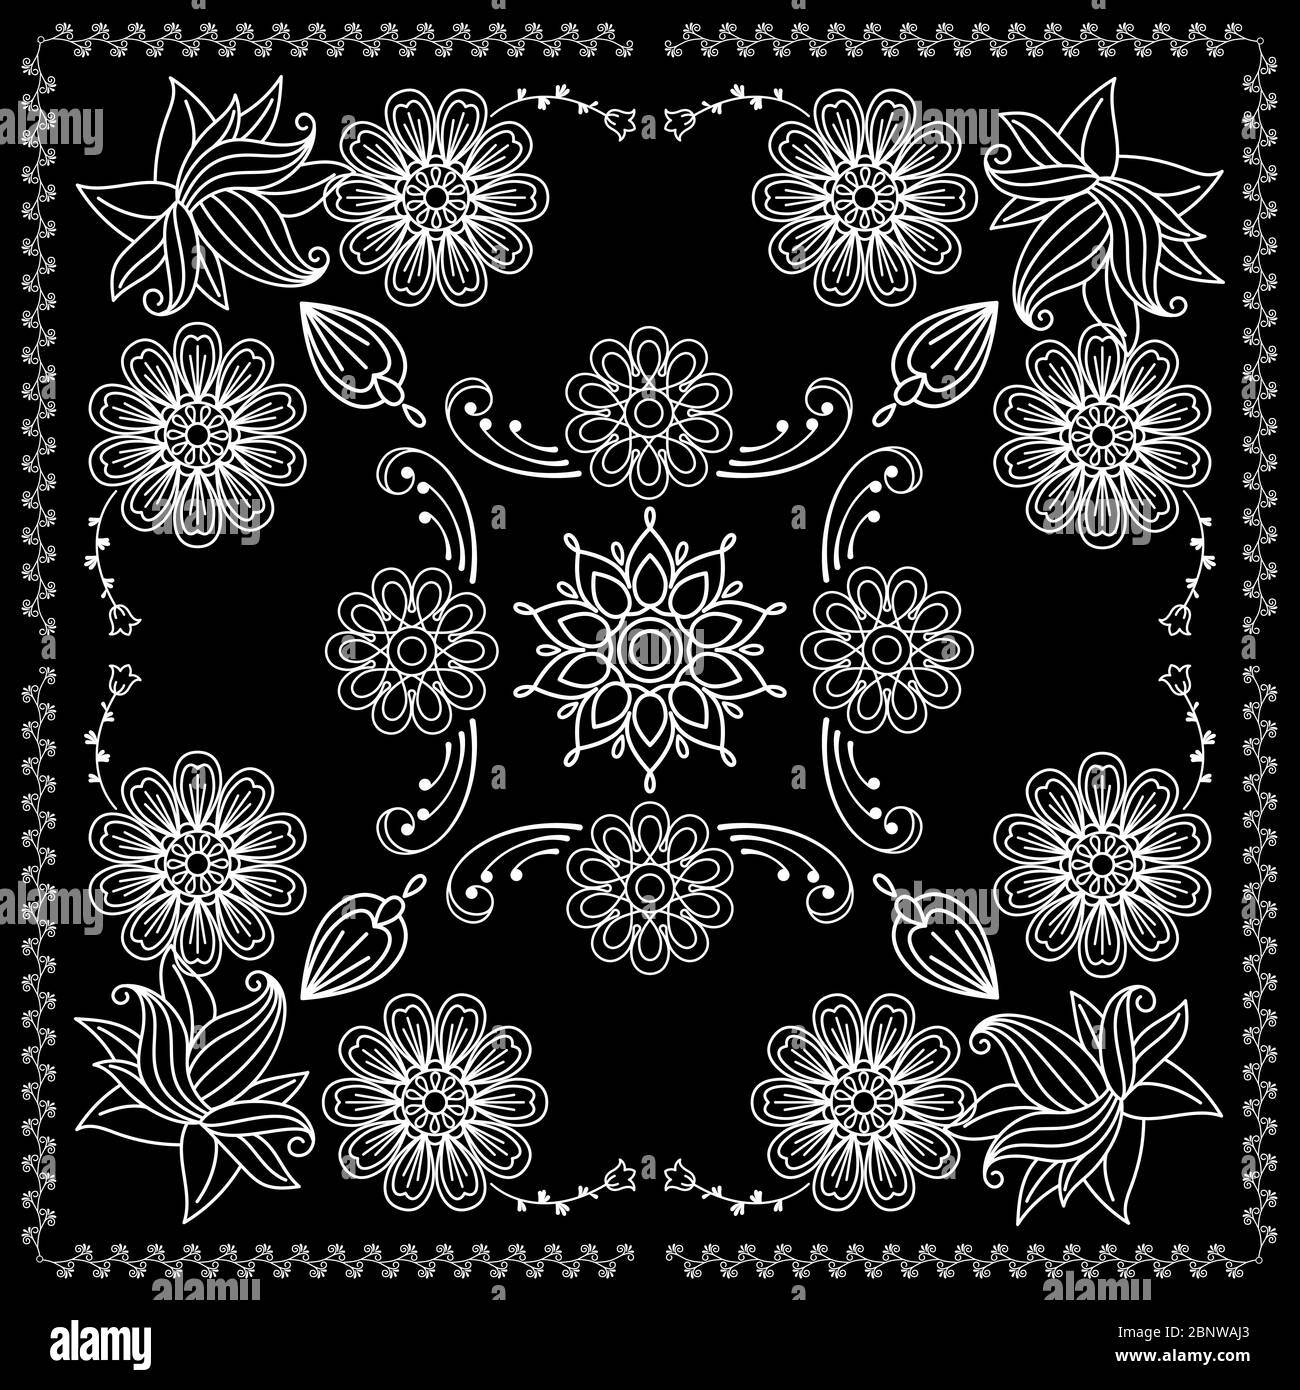 Black and White Bandana Print With Elements Henna Style. Vector illustration Stock Vector